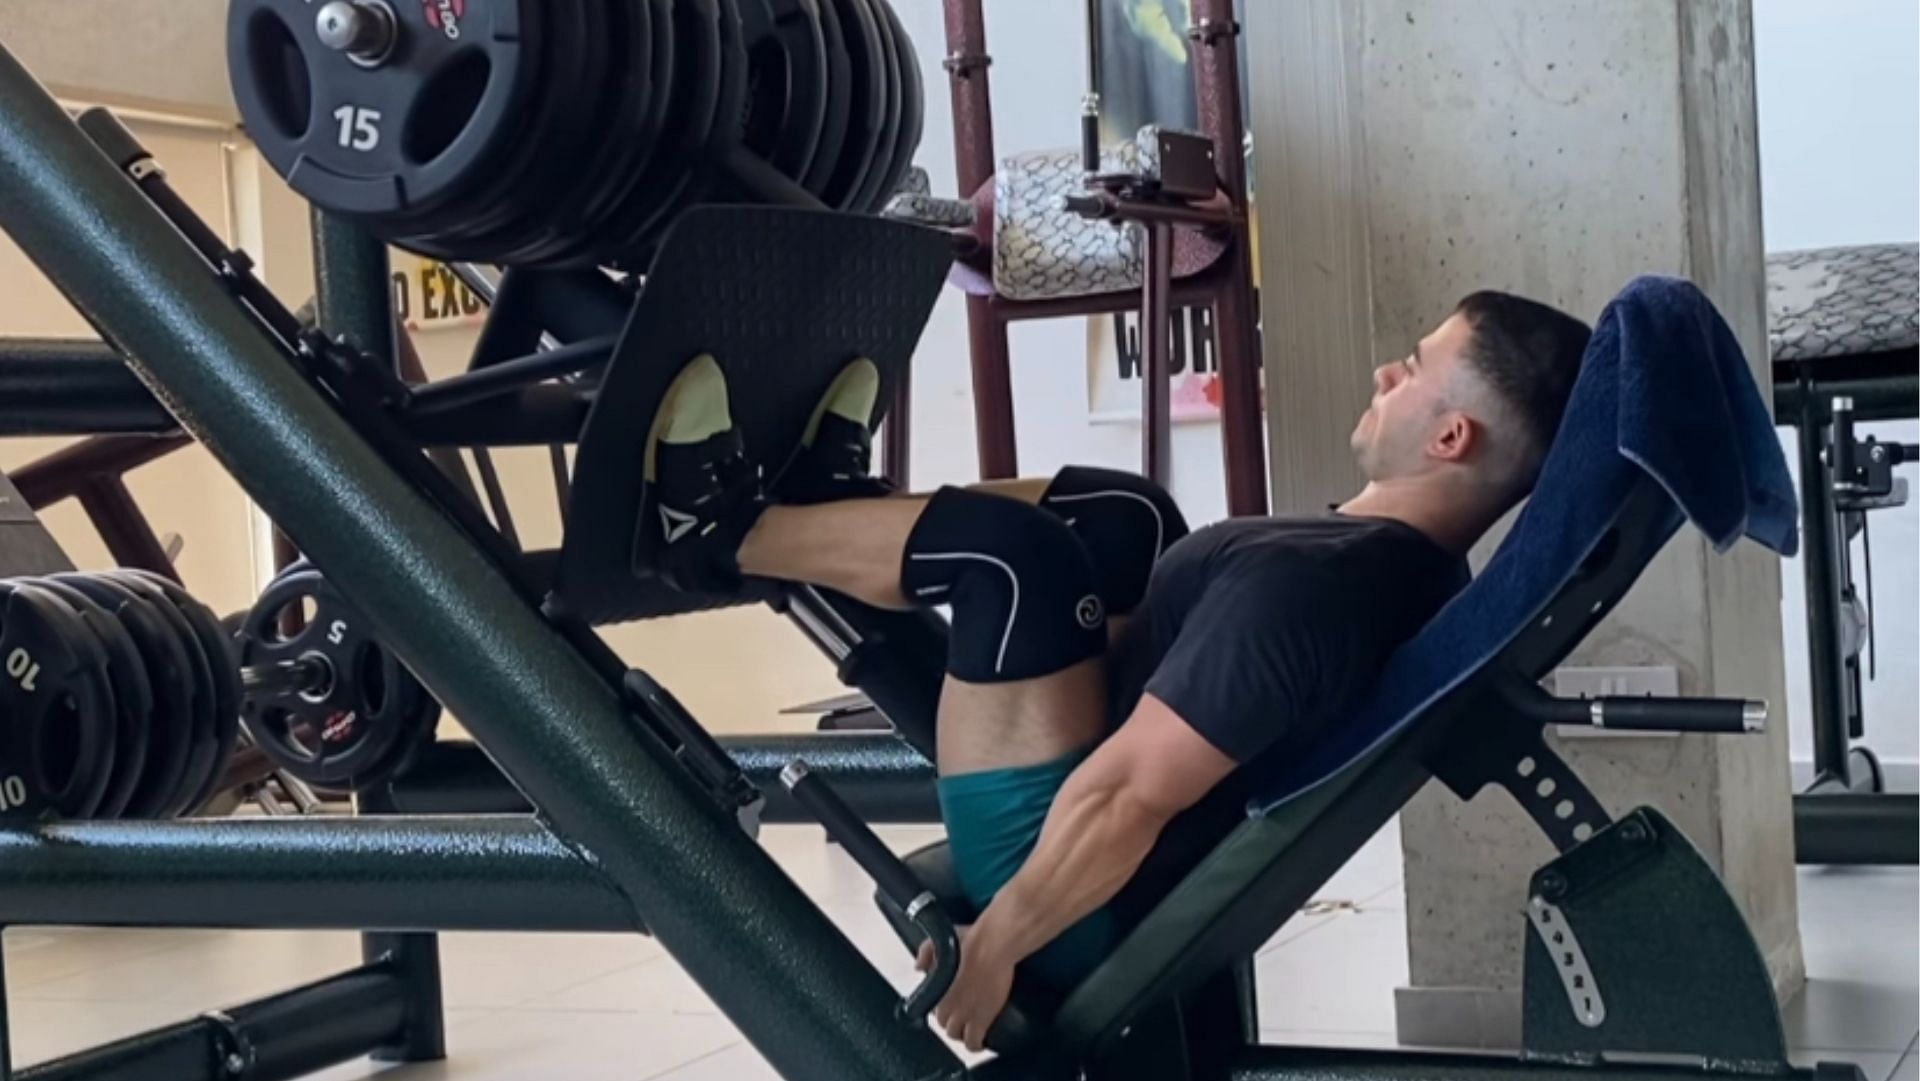 The leg press exercise helps develop muscle and strength in your lower body. (Photo via Instagram/georgeiacovou)